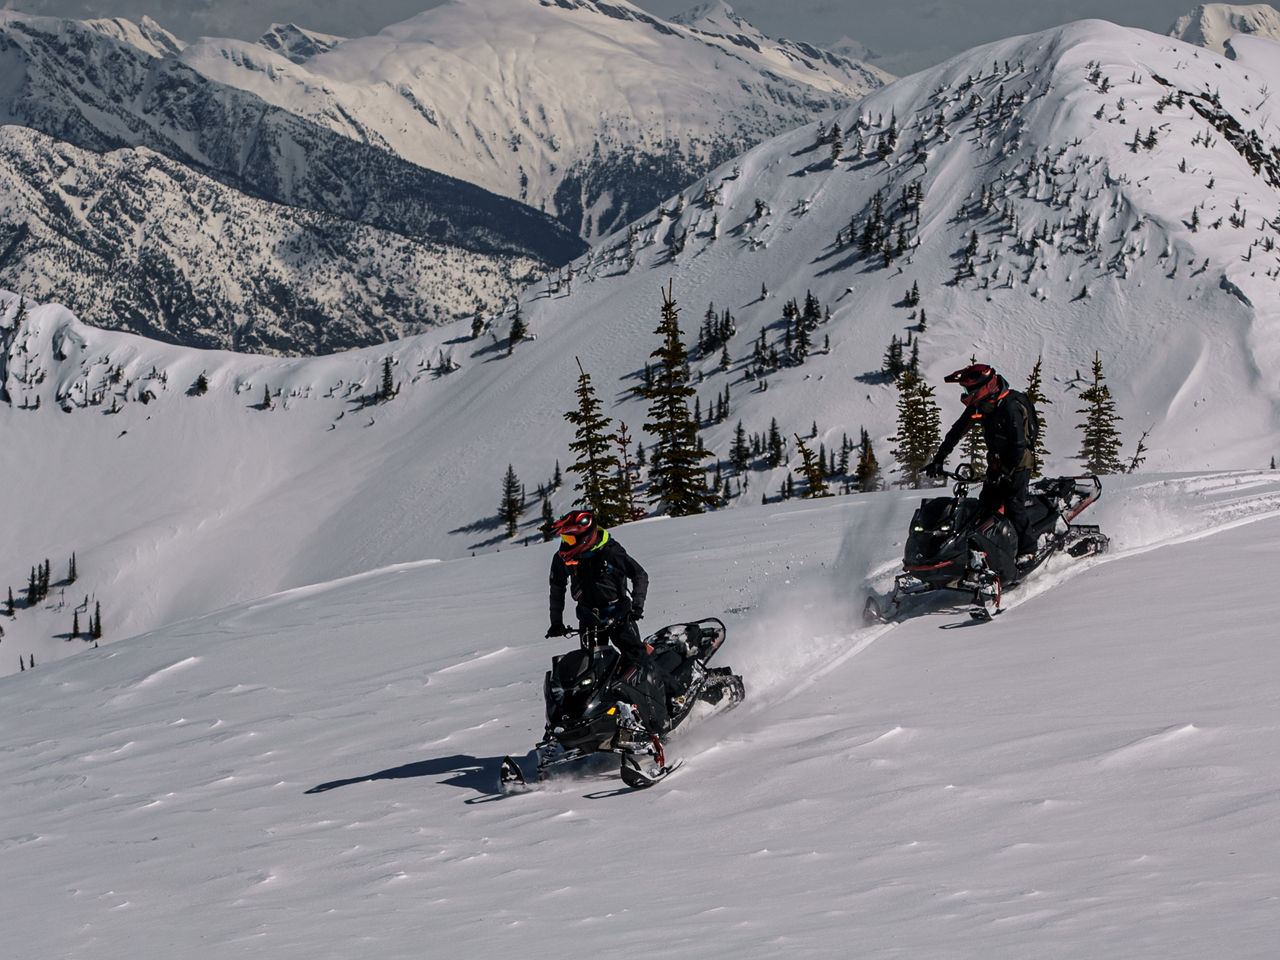 Exciting mountain peak riding in Sicamous, BC